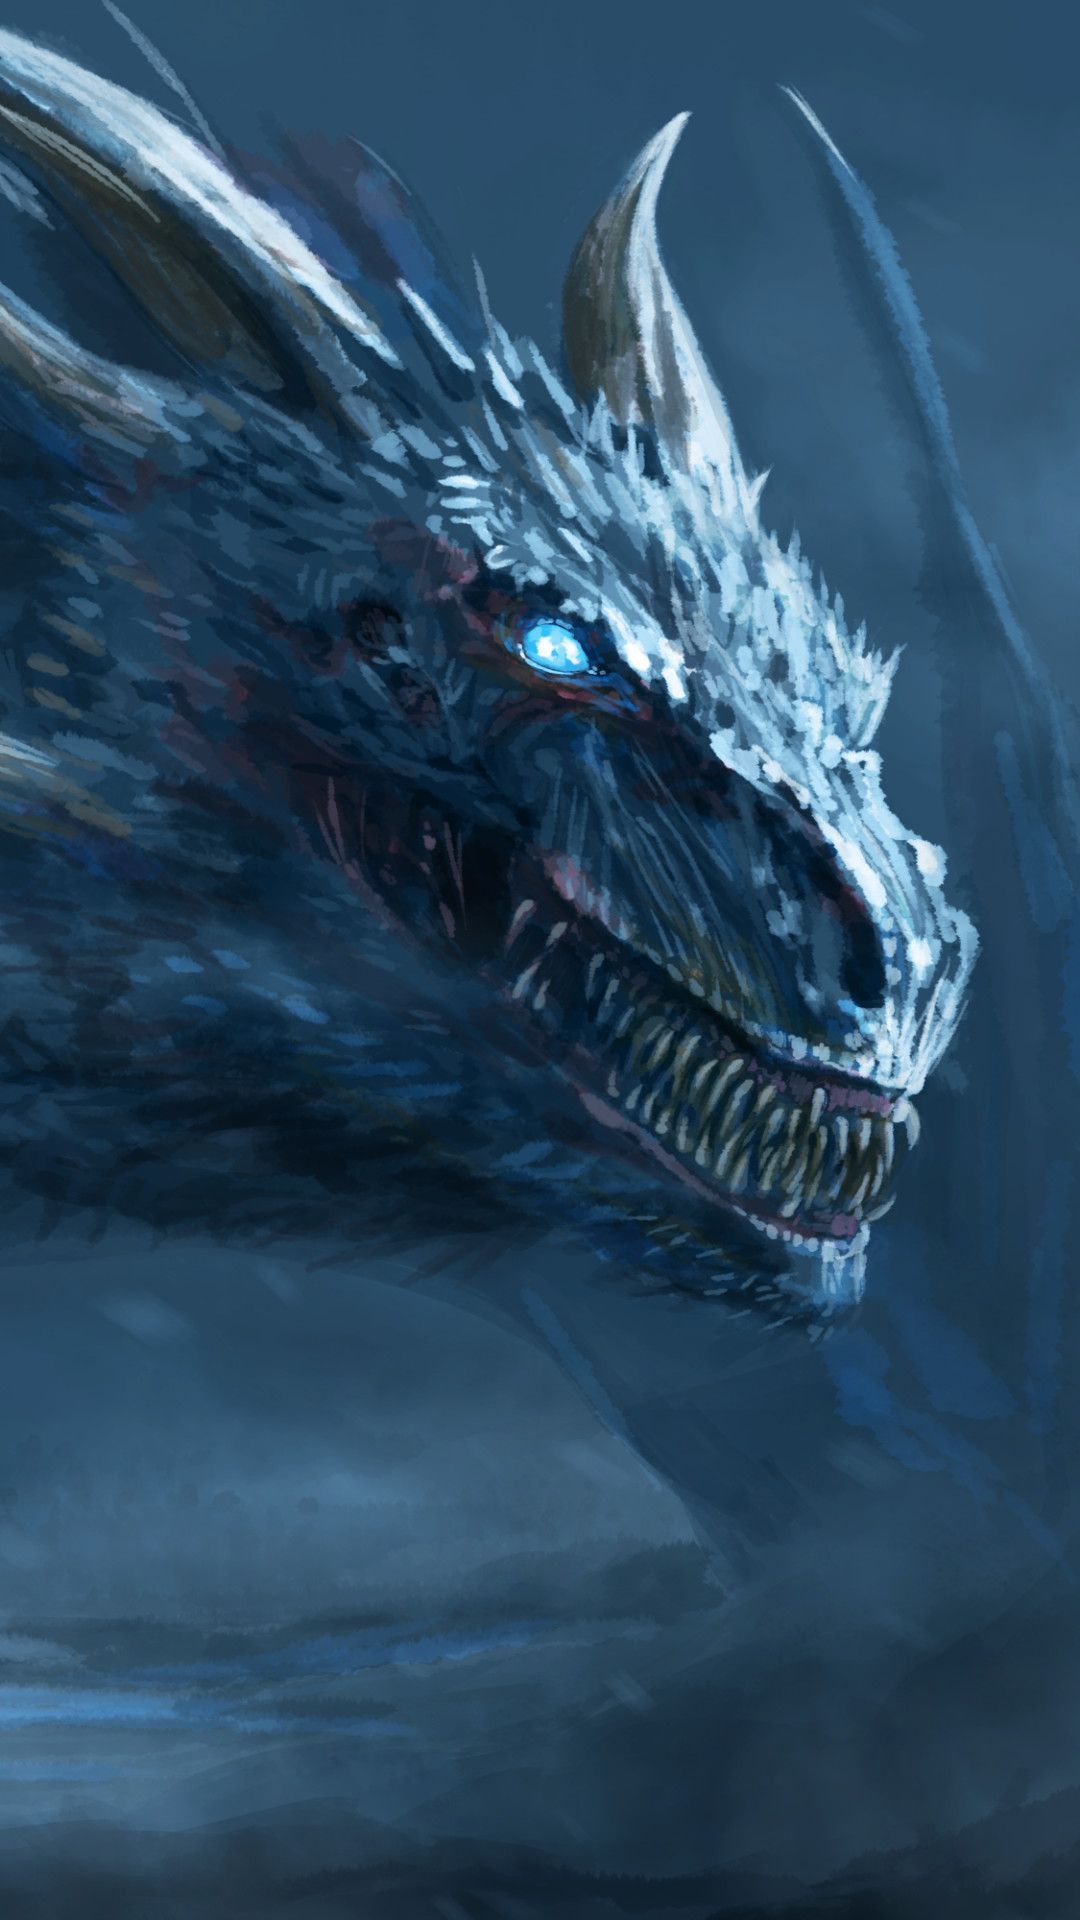 Dragon Game Of Thrones HD Wallpaper Android. HD wallpaper android, 4k wallpaper for mobile, Android wallpaper